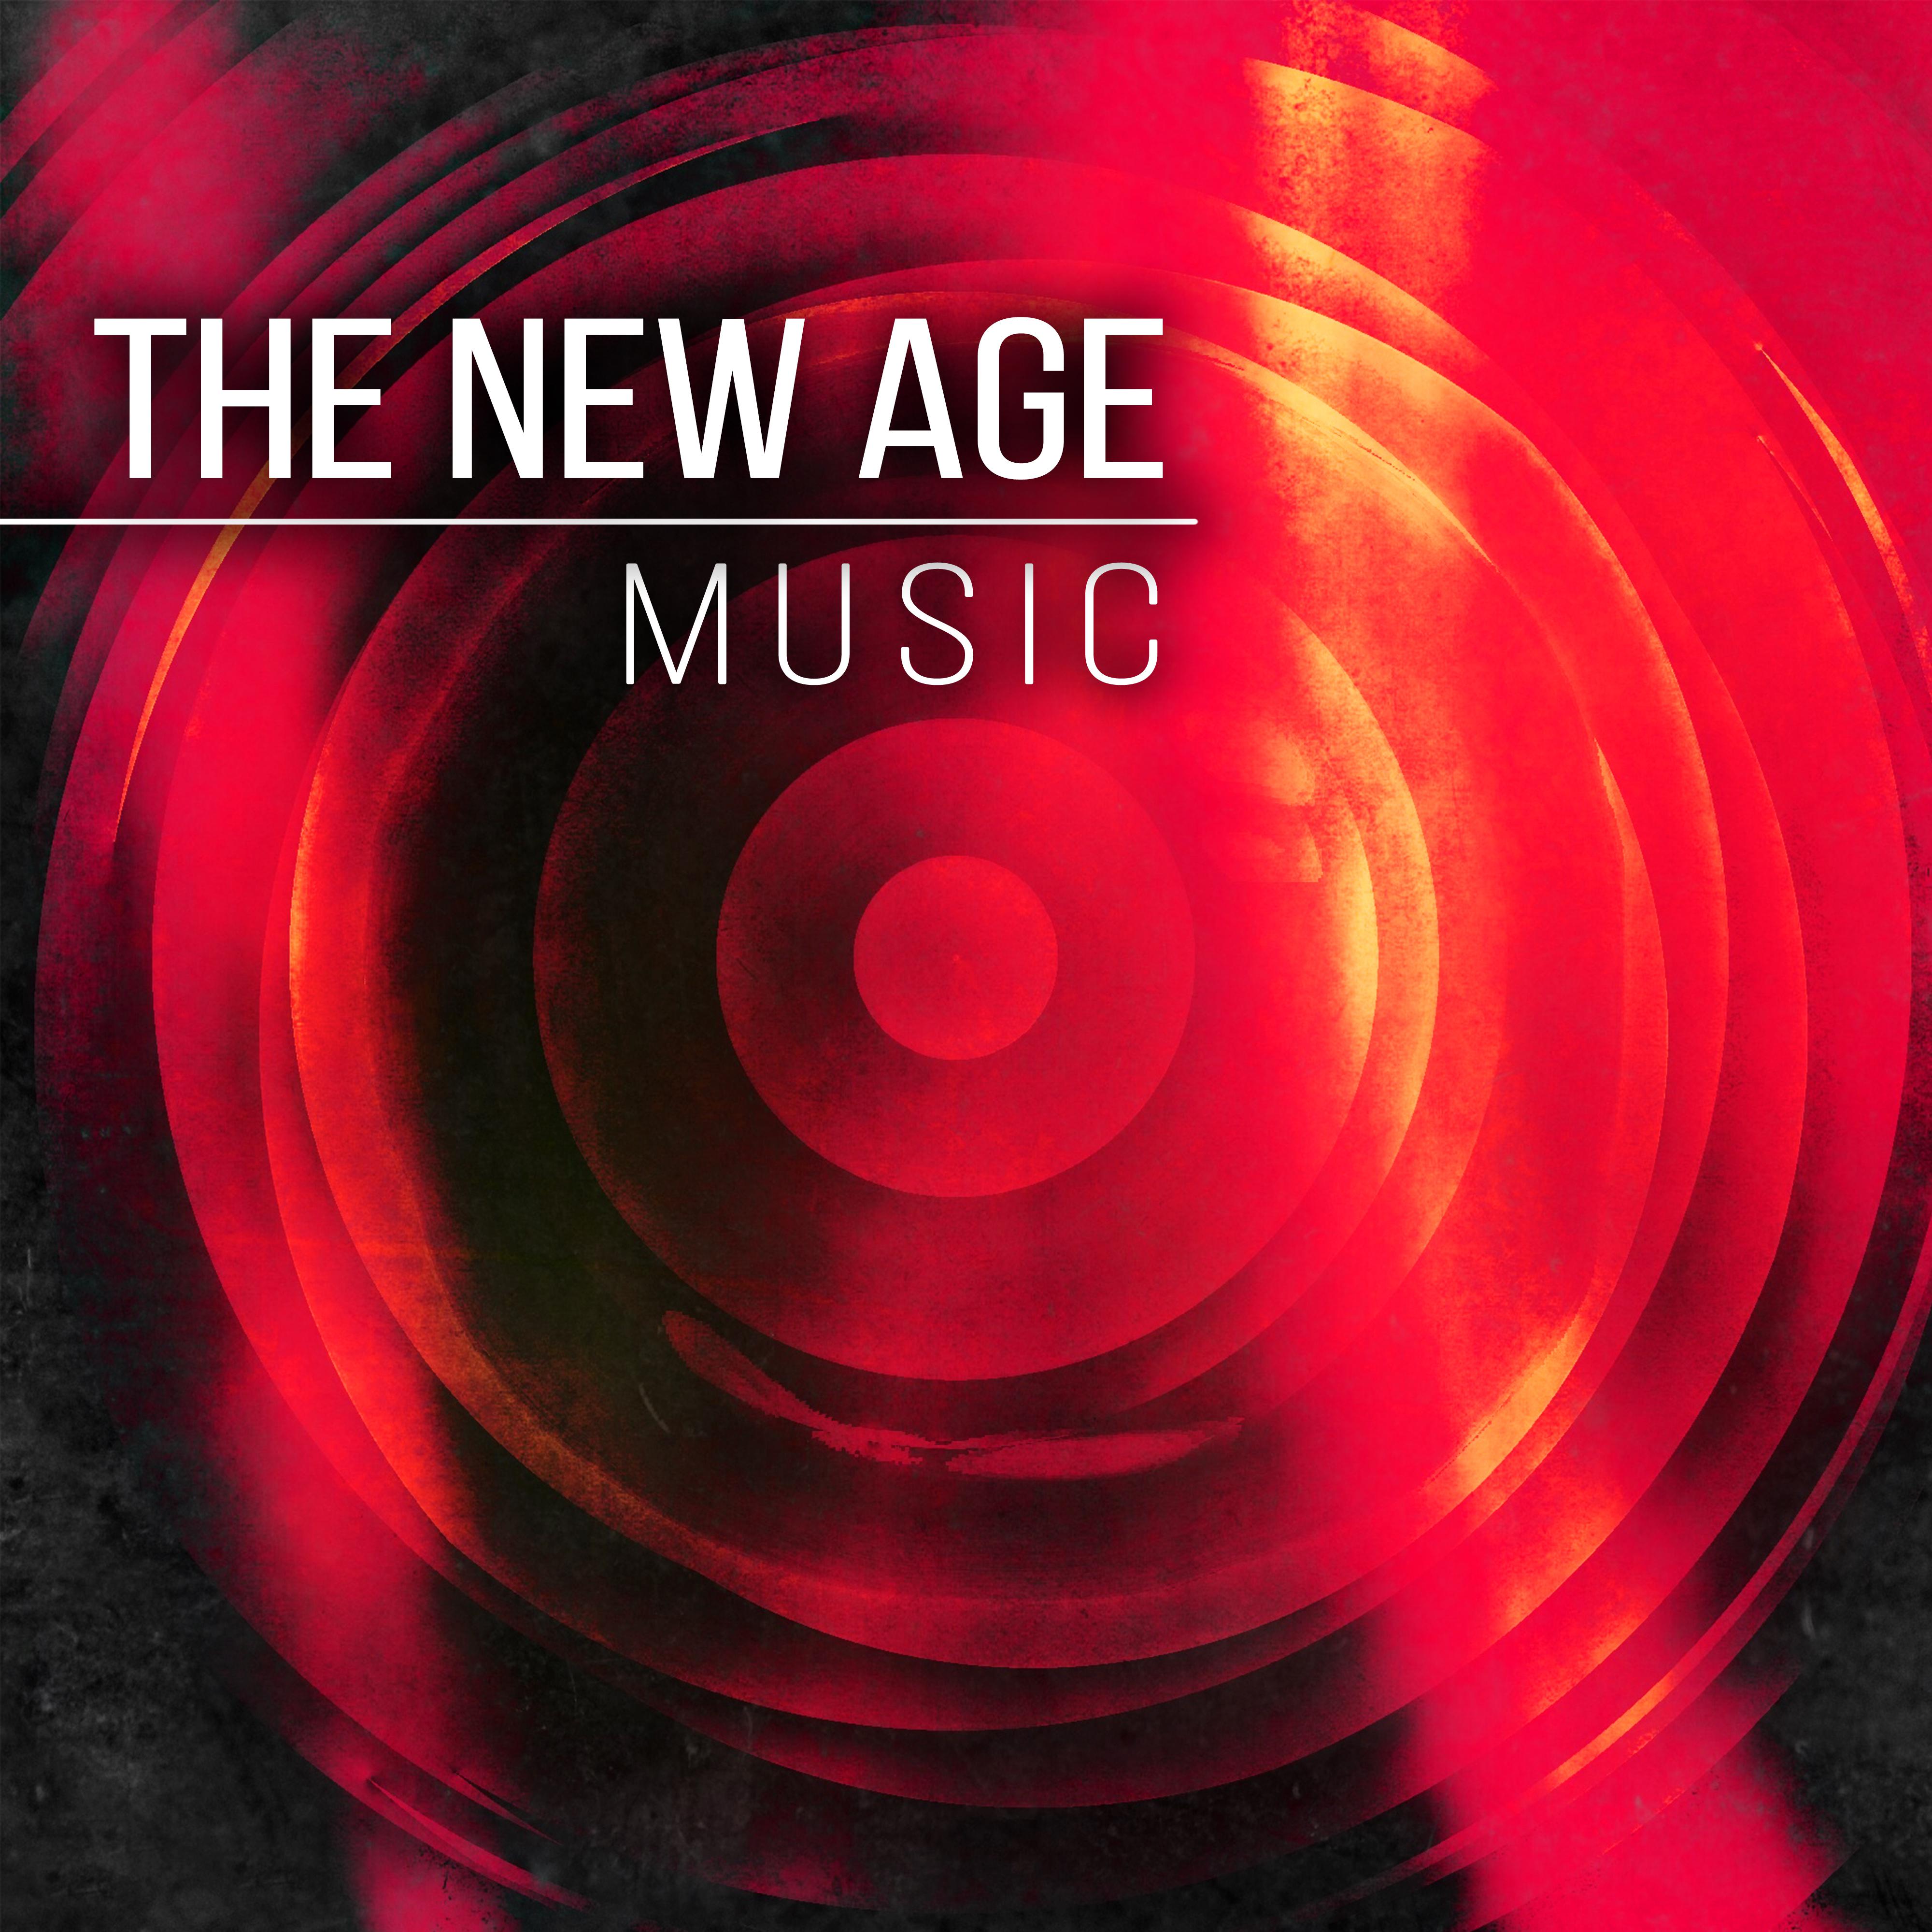 The New Age Music - Self Healing to Achieve Happiness, Meditate and Feel Inner Power & Mental Energy